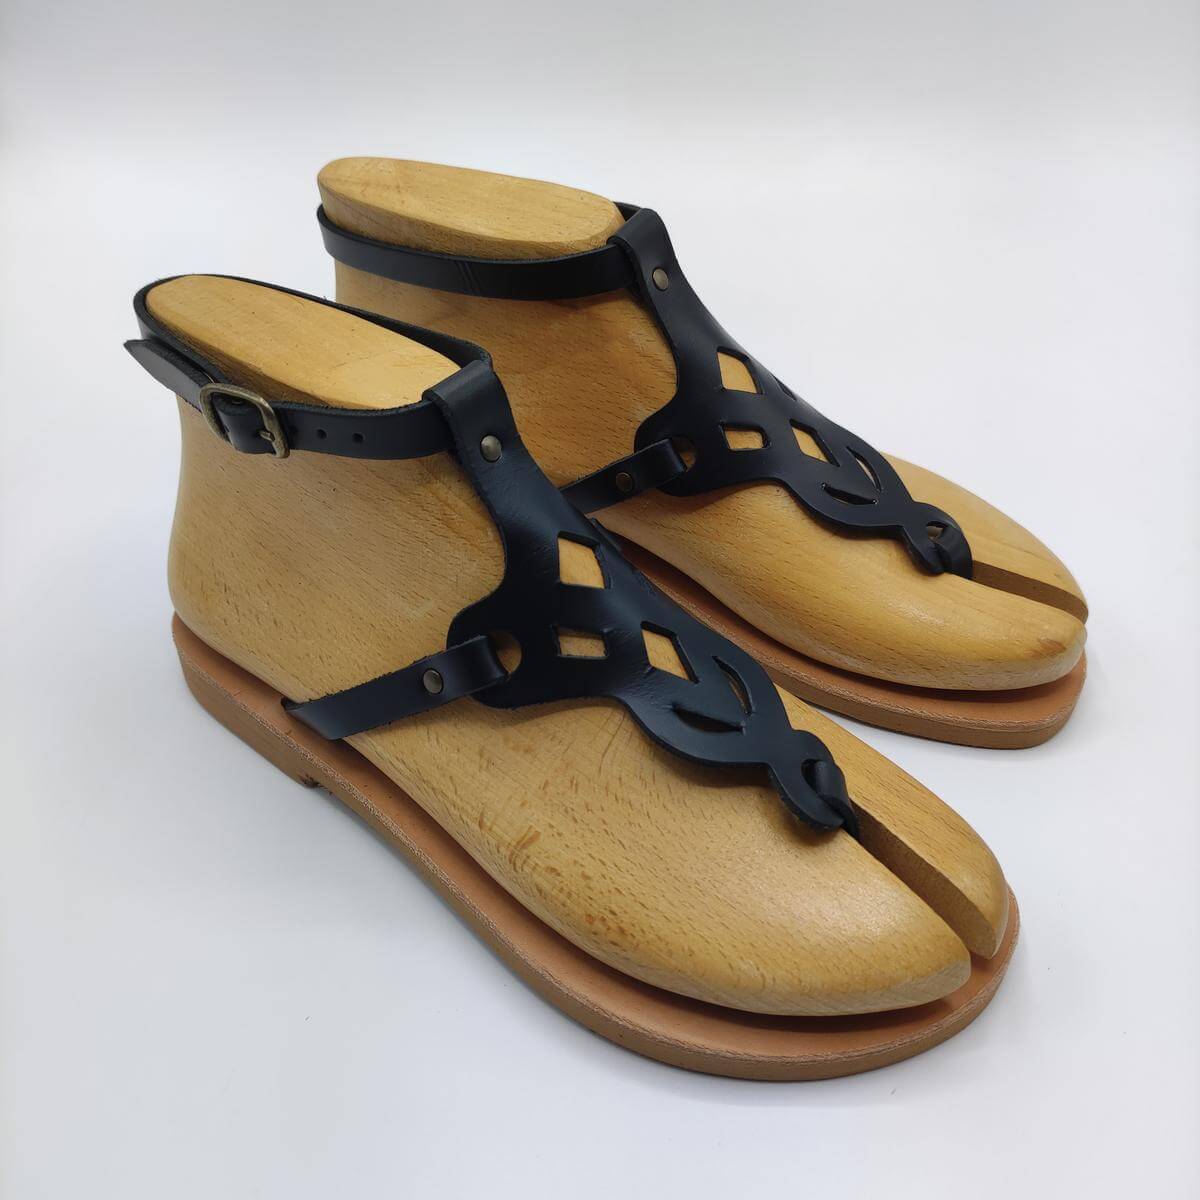 Womens Sandals That Wrap Around Ankle Natural Black